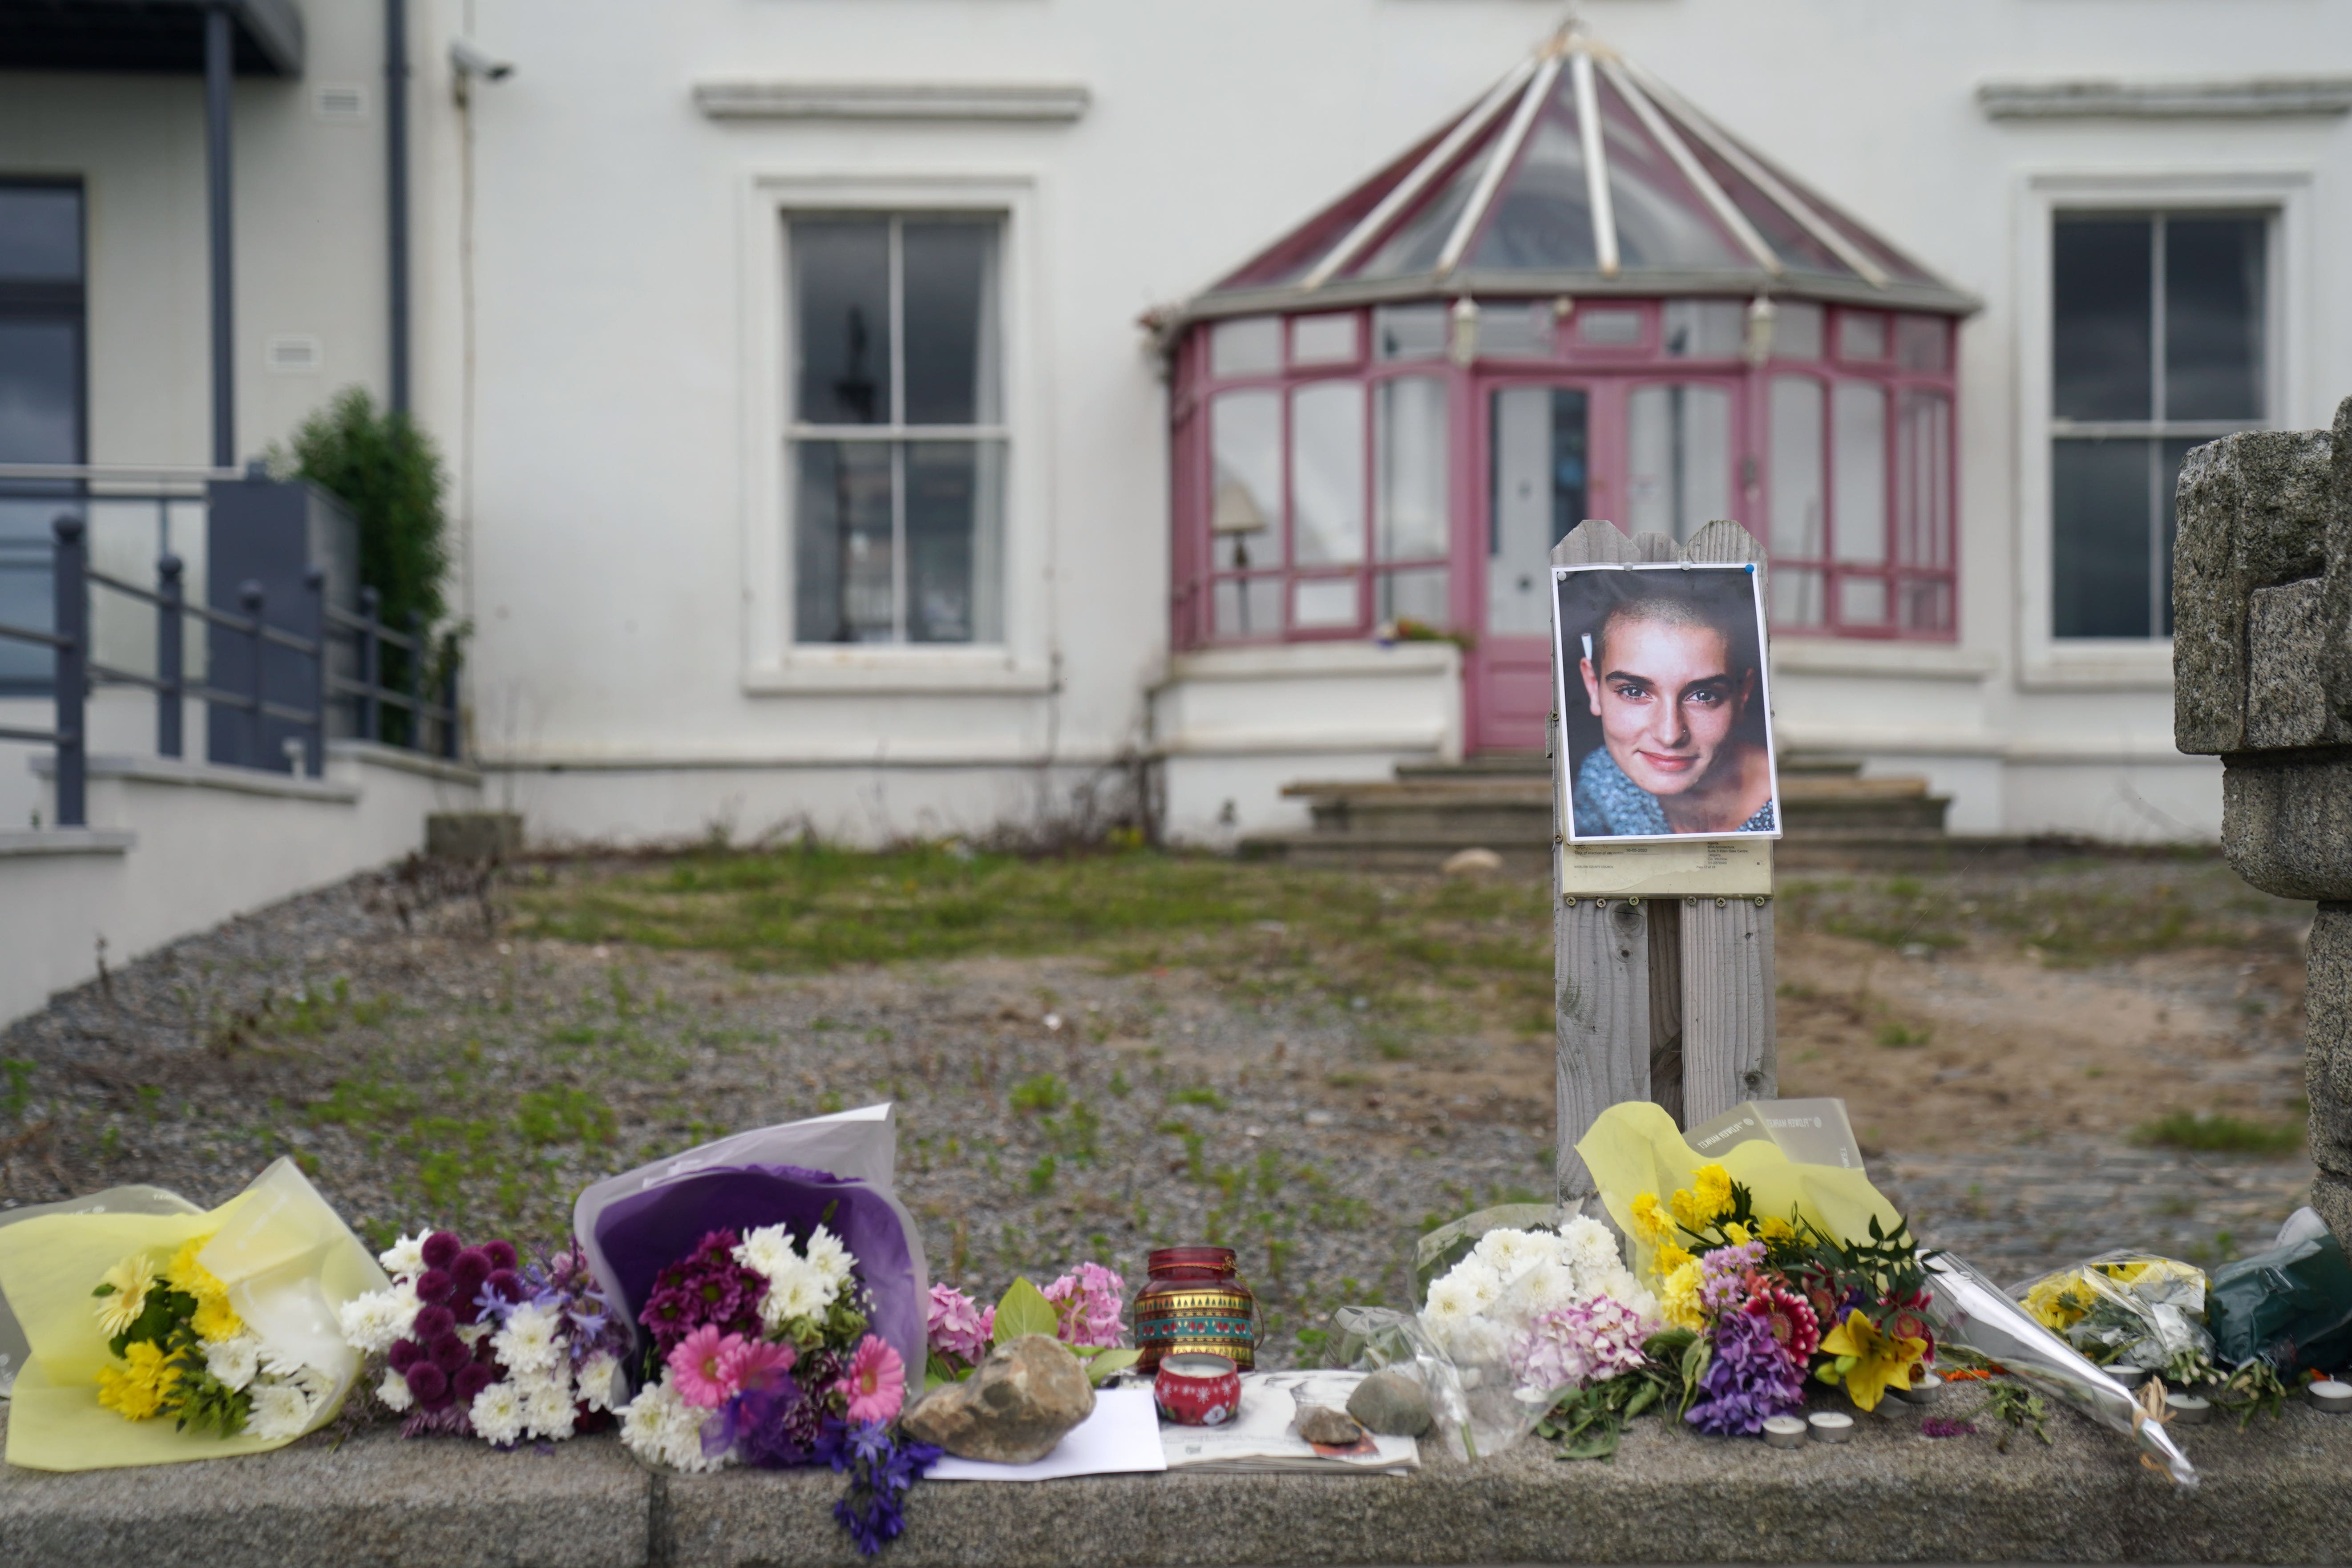 Floral tributes laid outside Sinead O’Connor’s former home in Bray